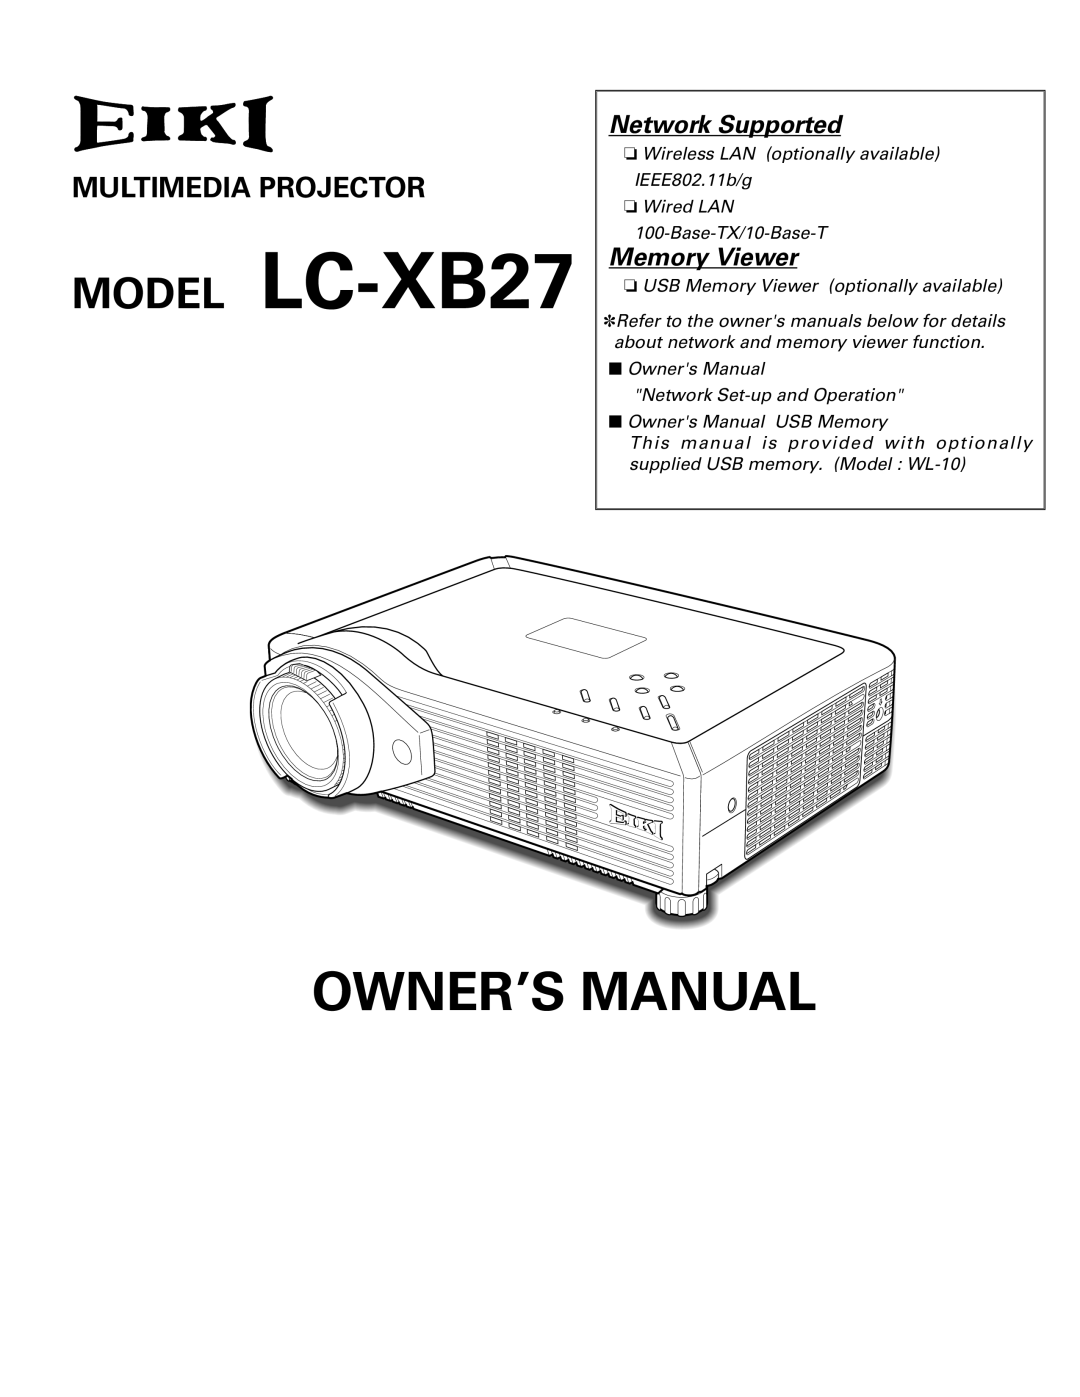 Eiki owner manual Multimedia Projector, Network Supported, Memory Viewer, MODEL LC-XB27, Owner’S Manual 